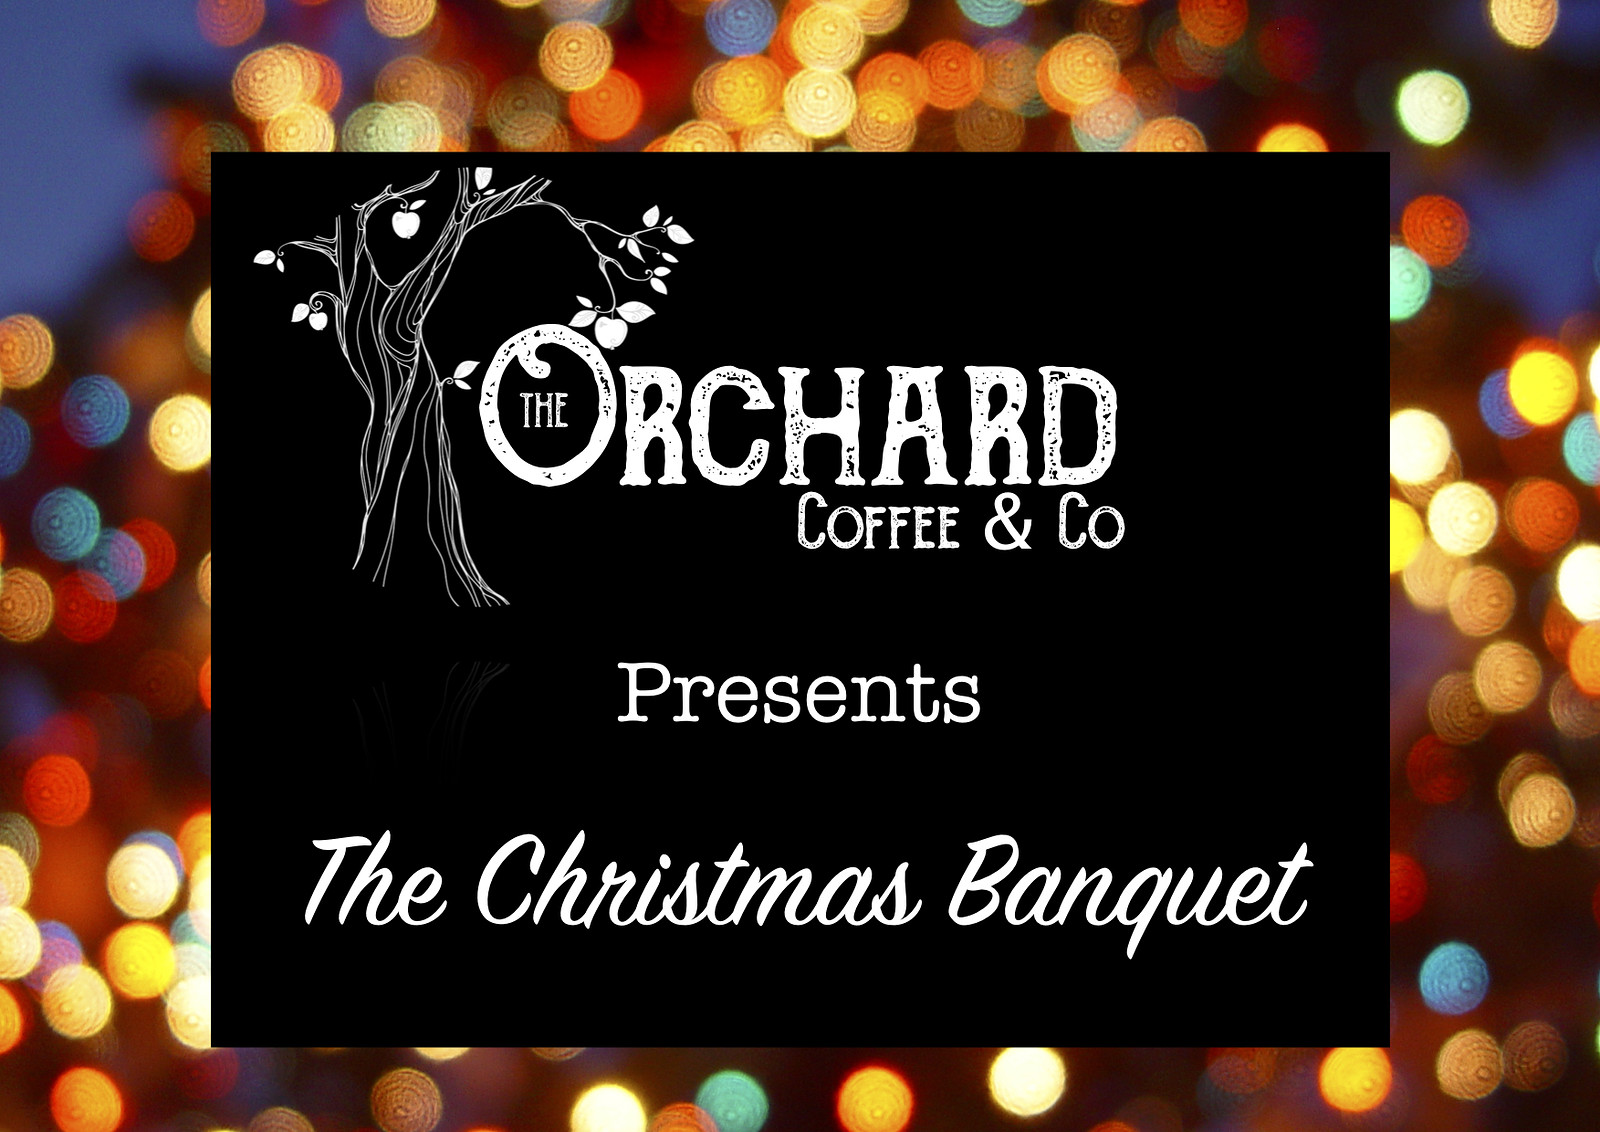 The Orchard Christmas Banquet at The Orchard Coffee and Co